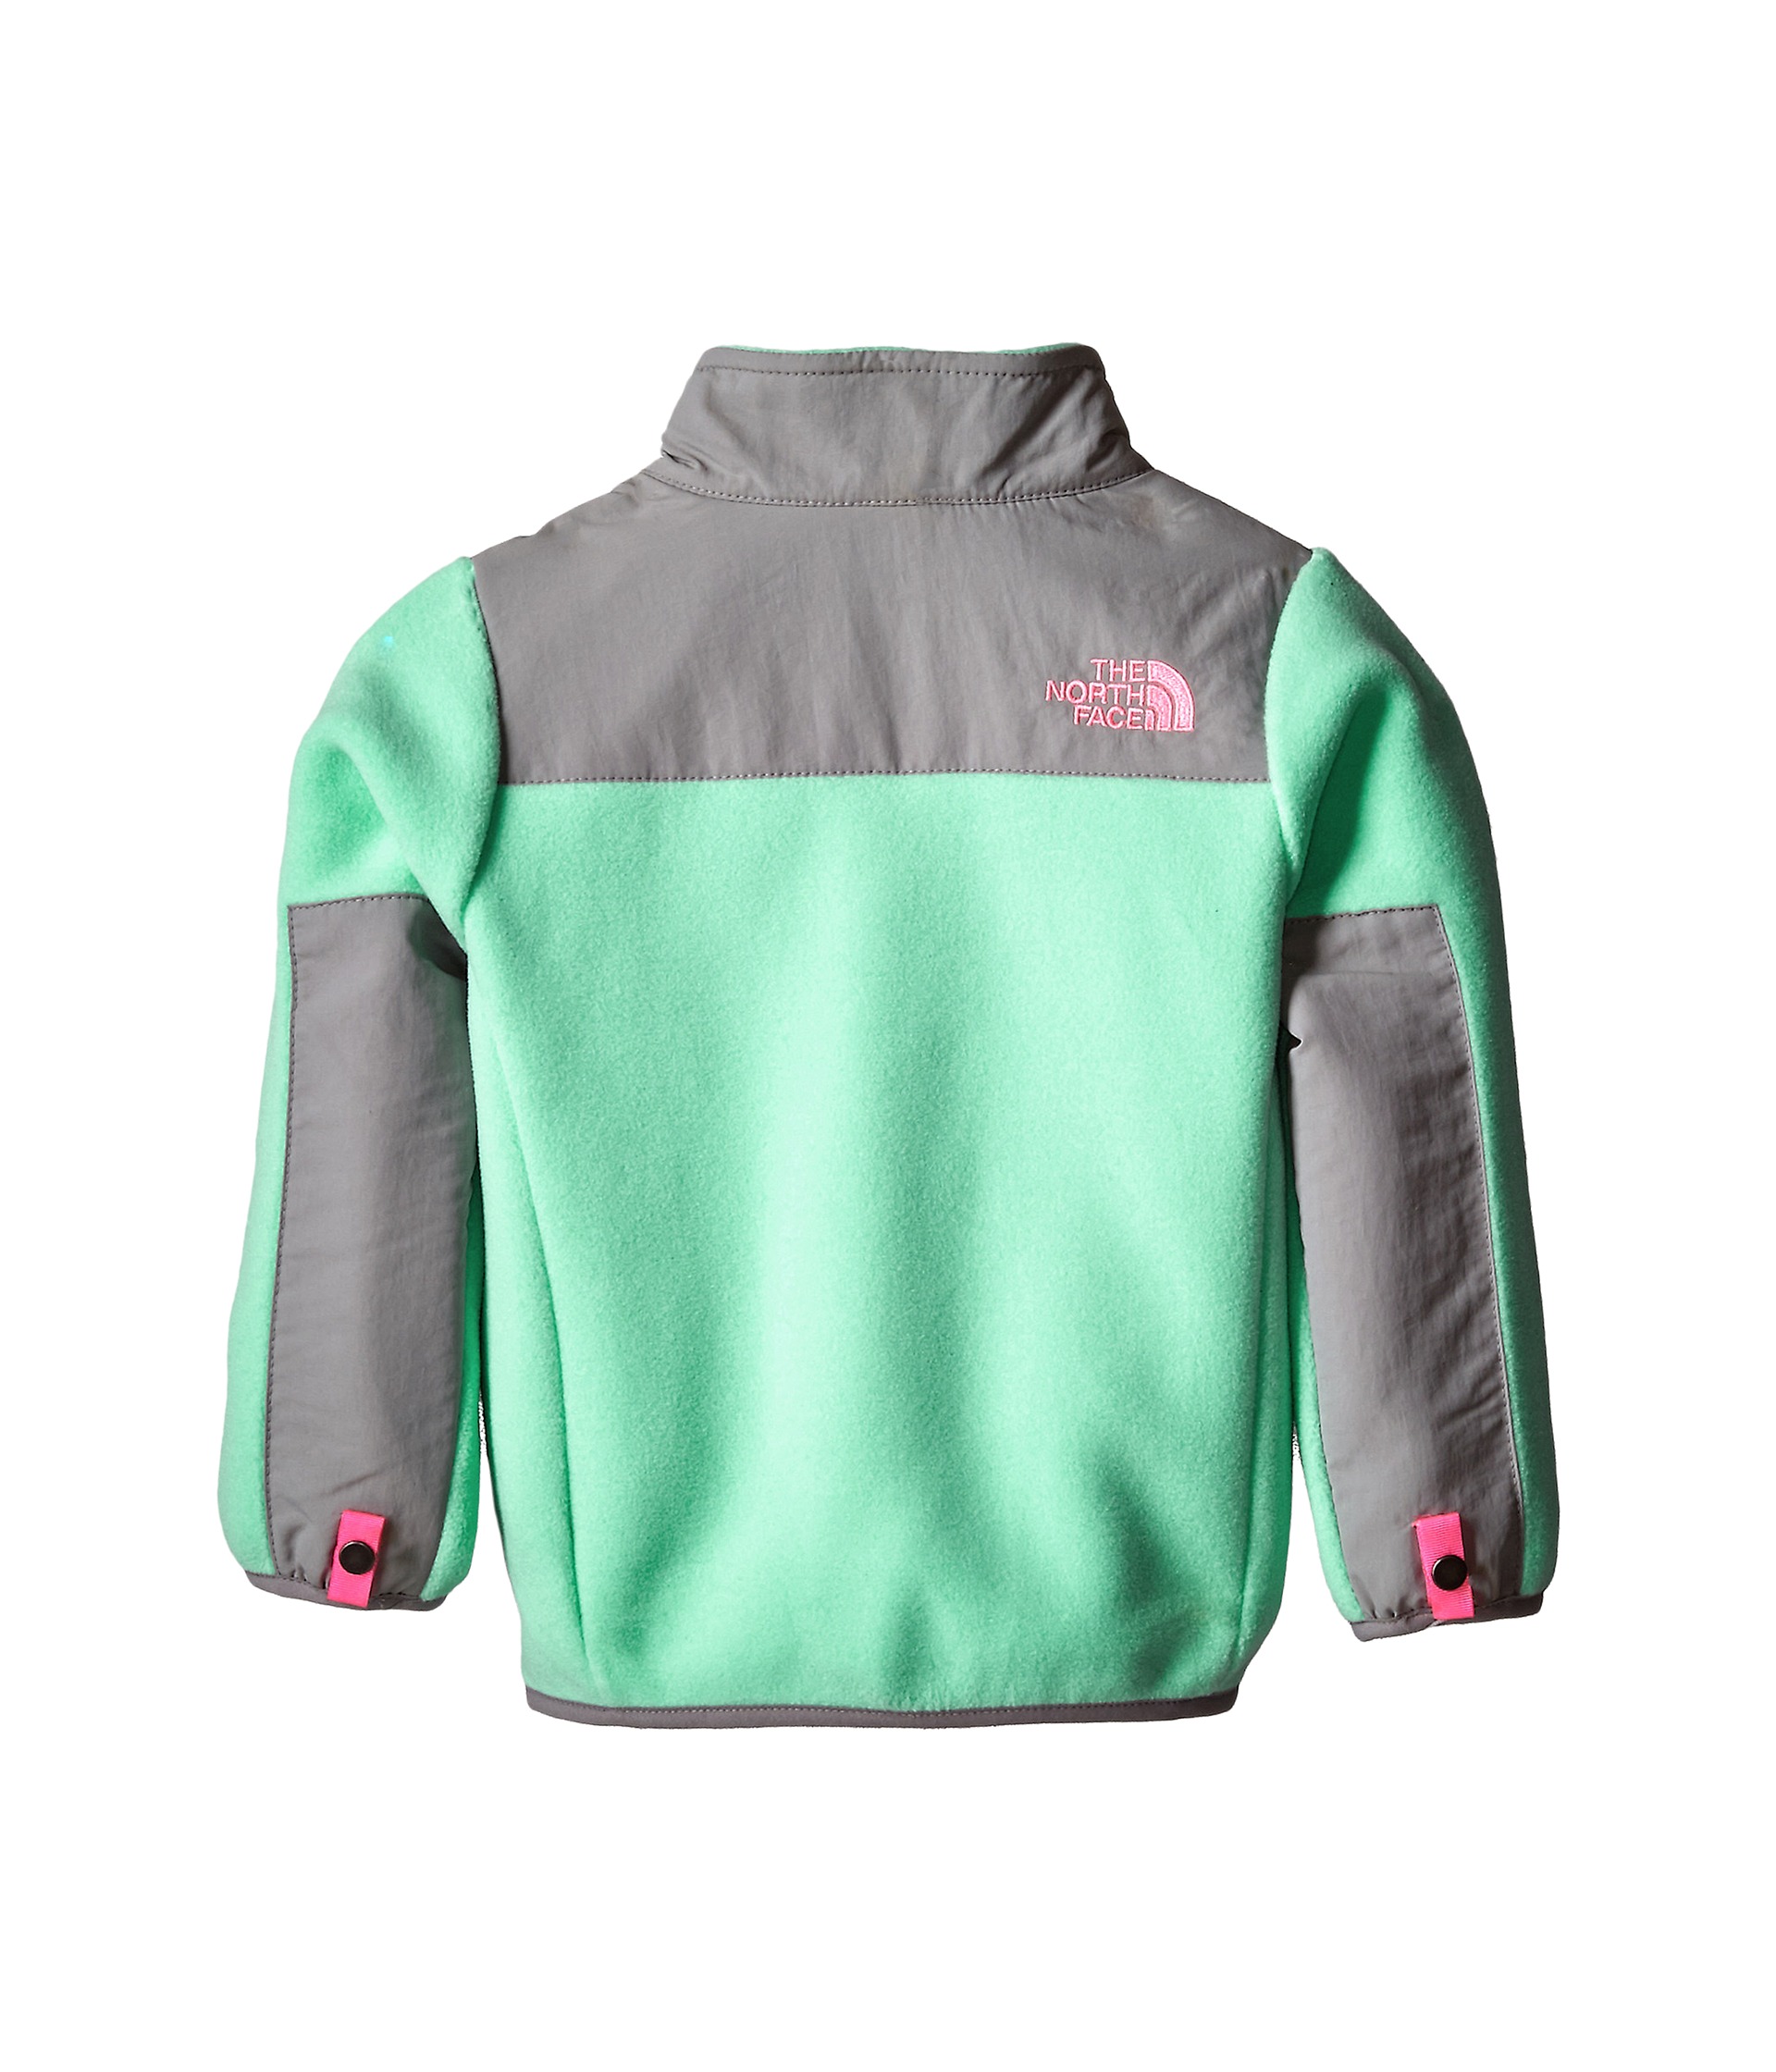 The North Face Kids Denali Jacket (Toddler) Recycled Surf Green